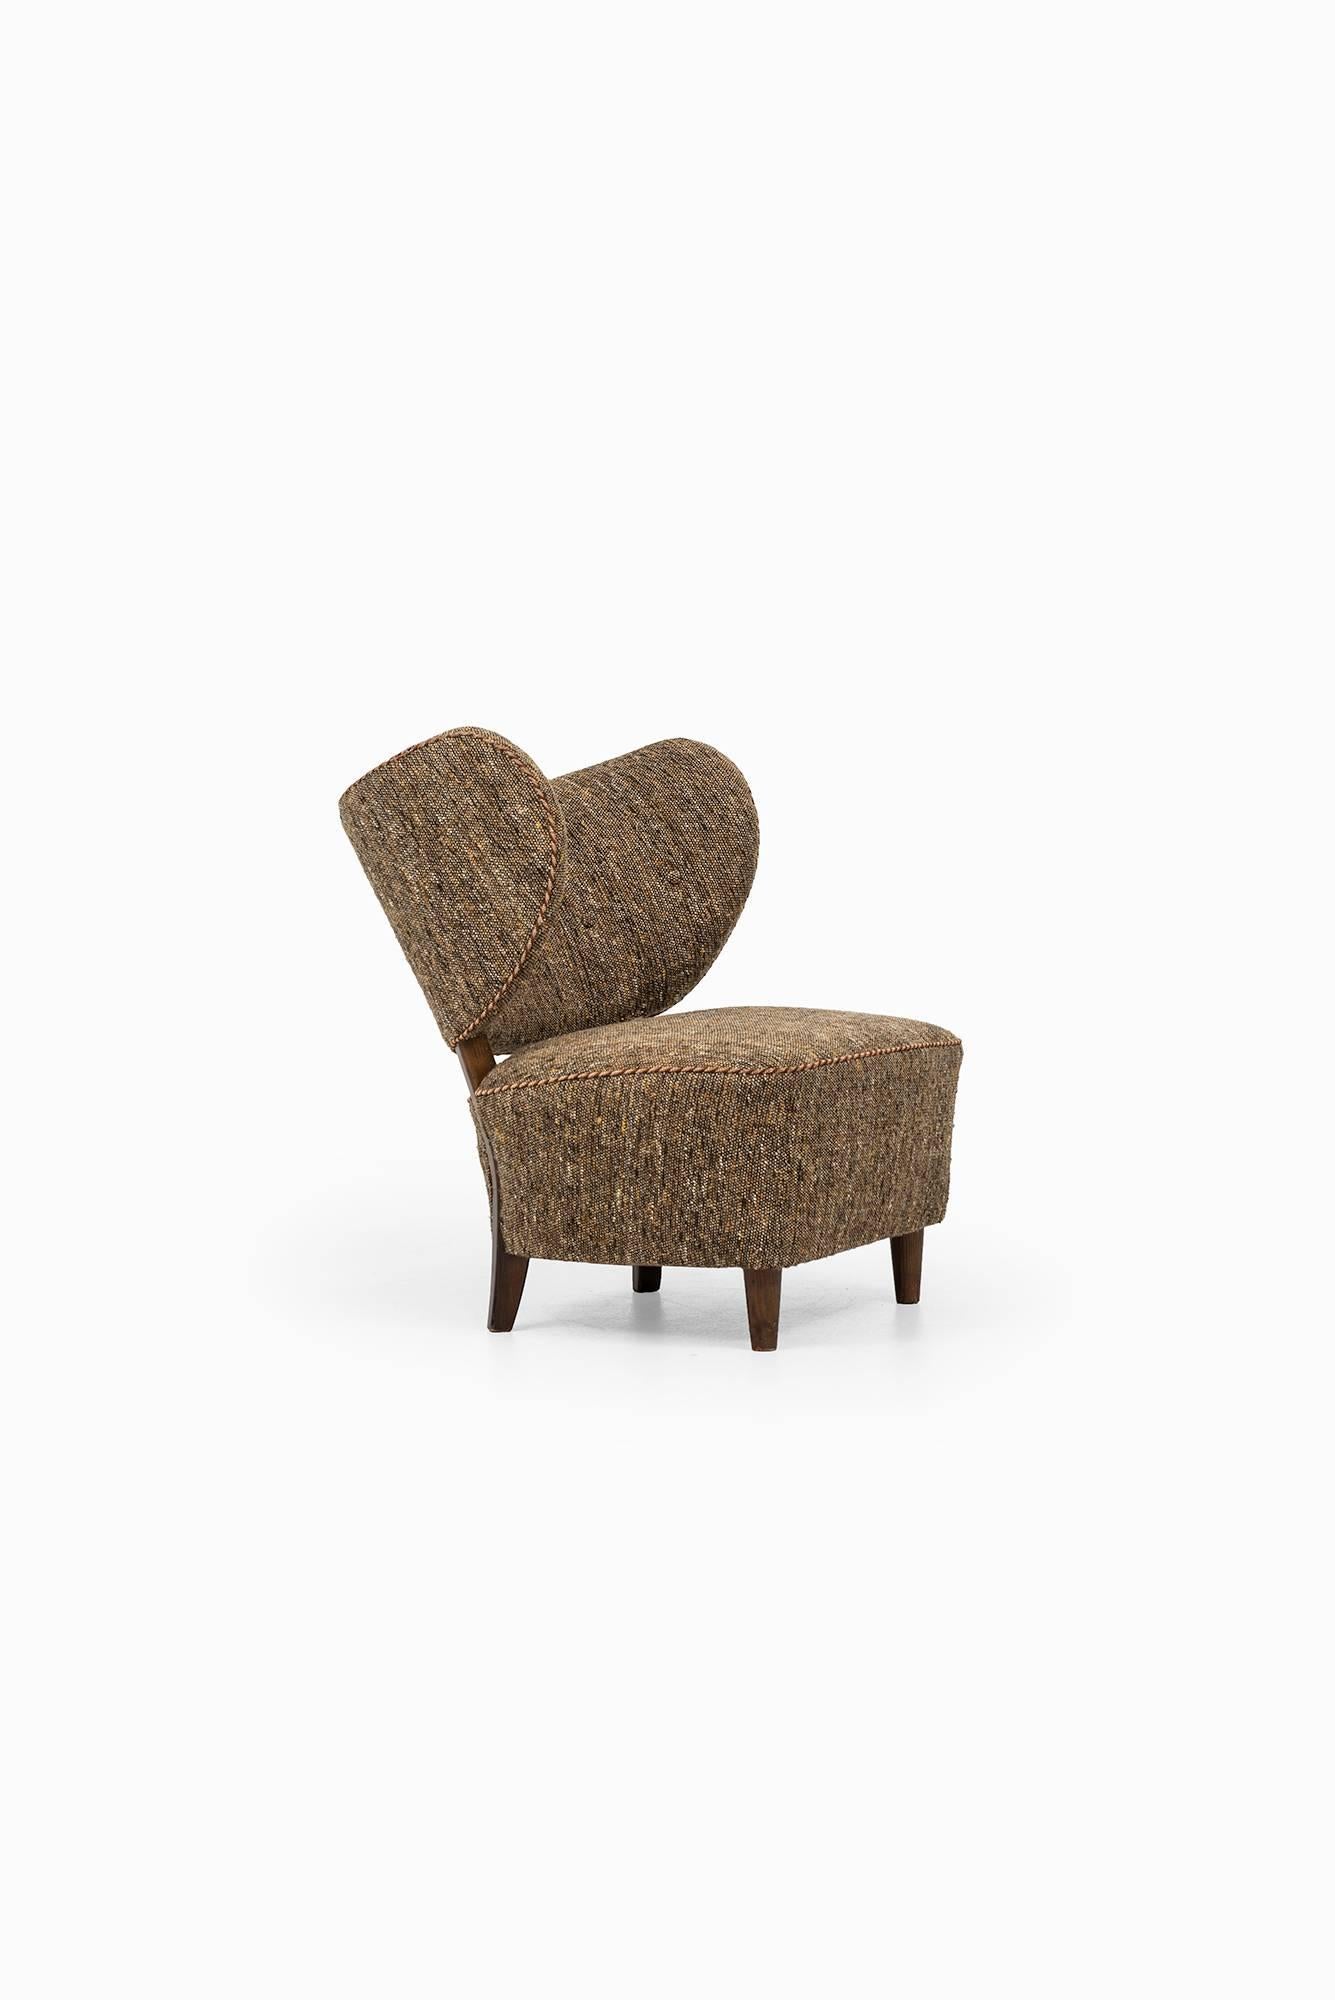 Swedish Otto Schulz easy chair produced by Boet in Sweden